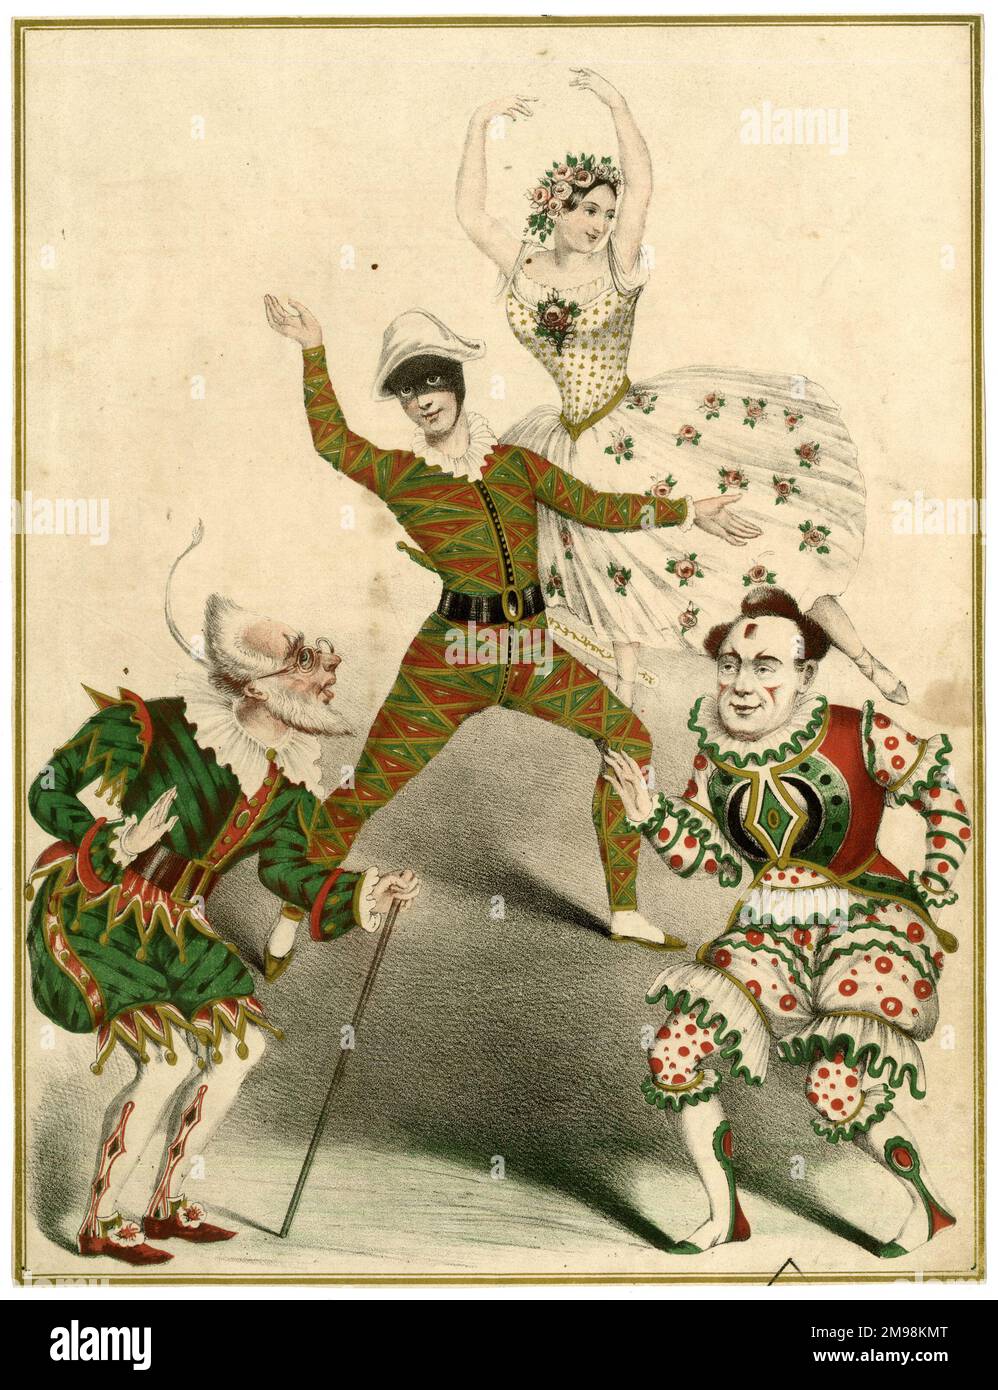 Pantomime Characters, Commedia dell'Arte - Clown, Harlequin, Columbine and Pantaloon. Stock Photo